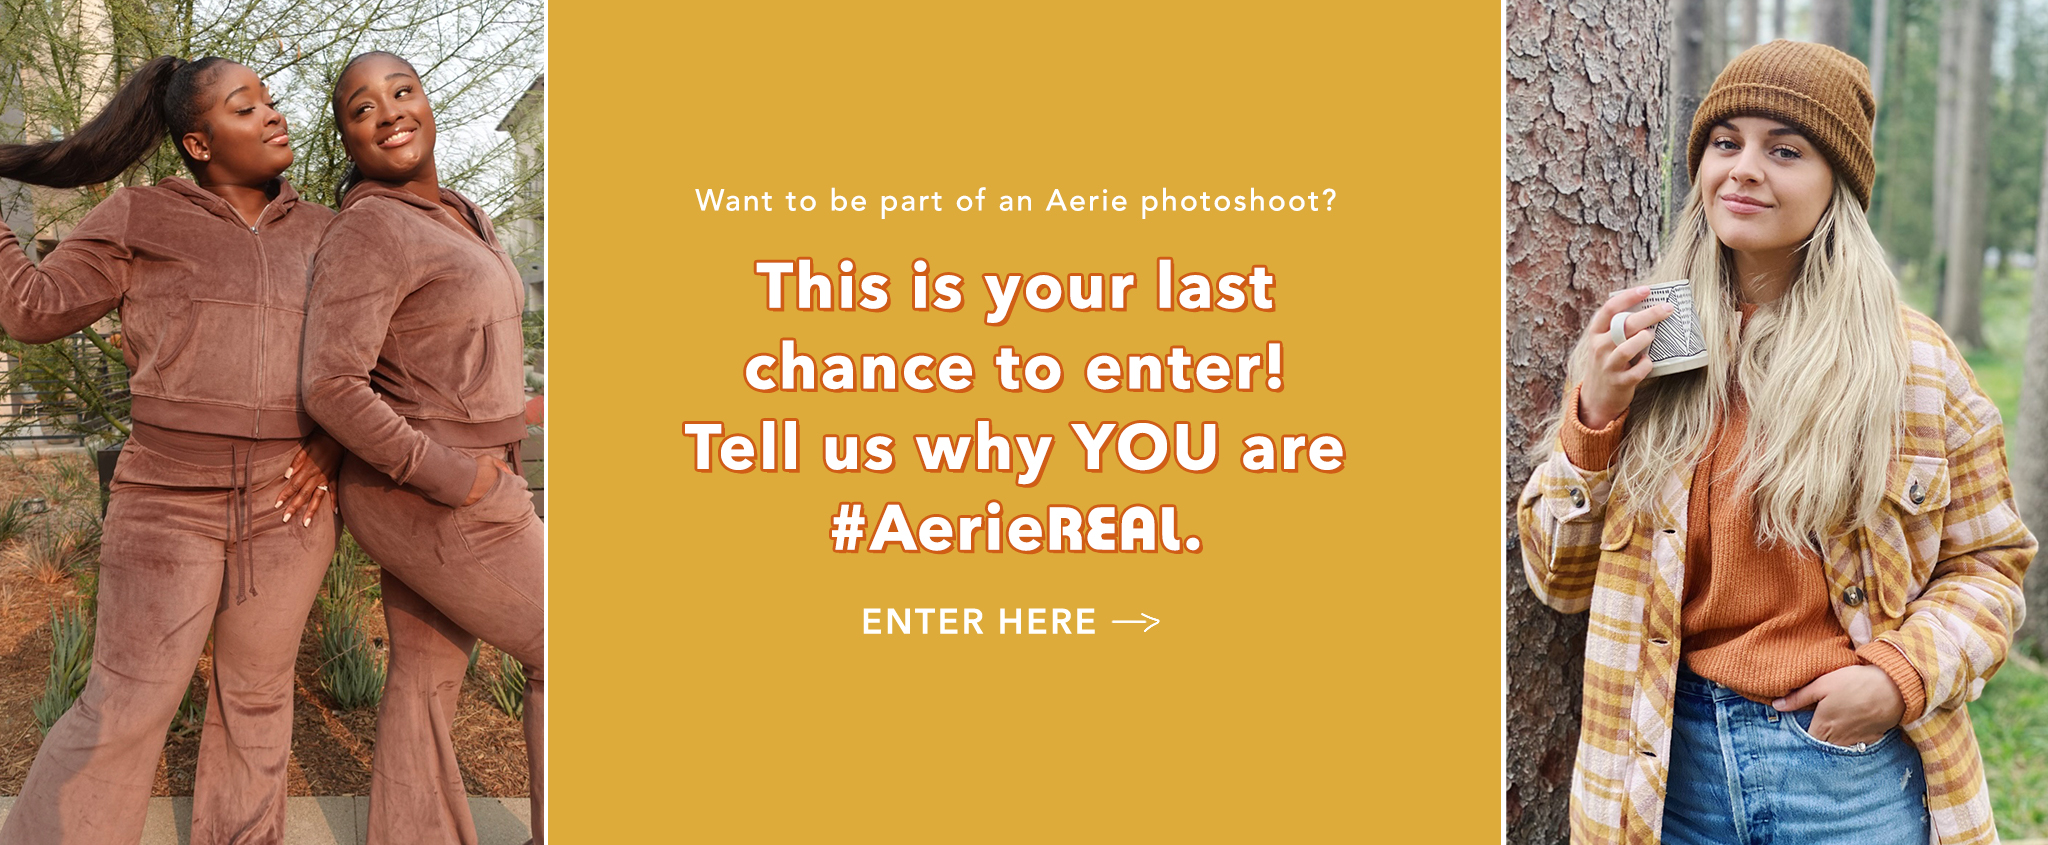 Aerie x Liberare: The Disability Partnership You've Been Waiting For -  #AerieREAL Life